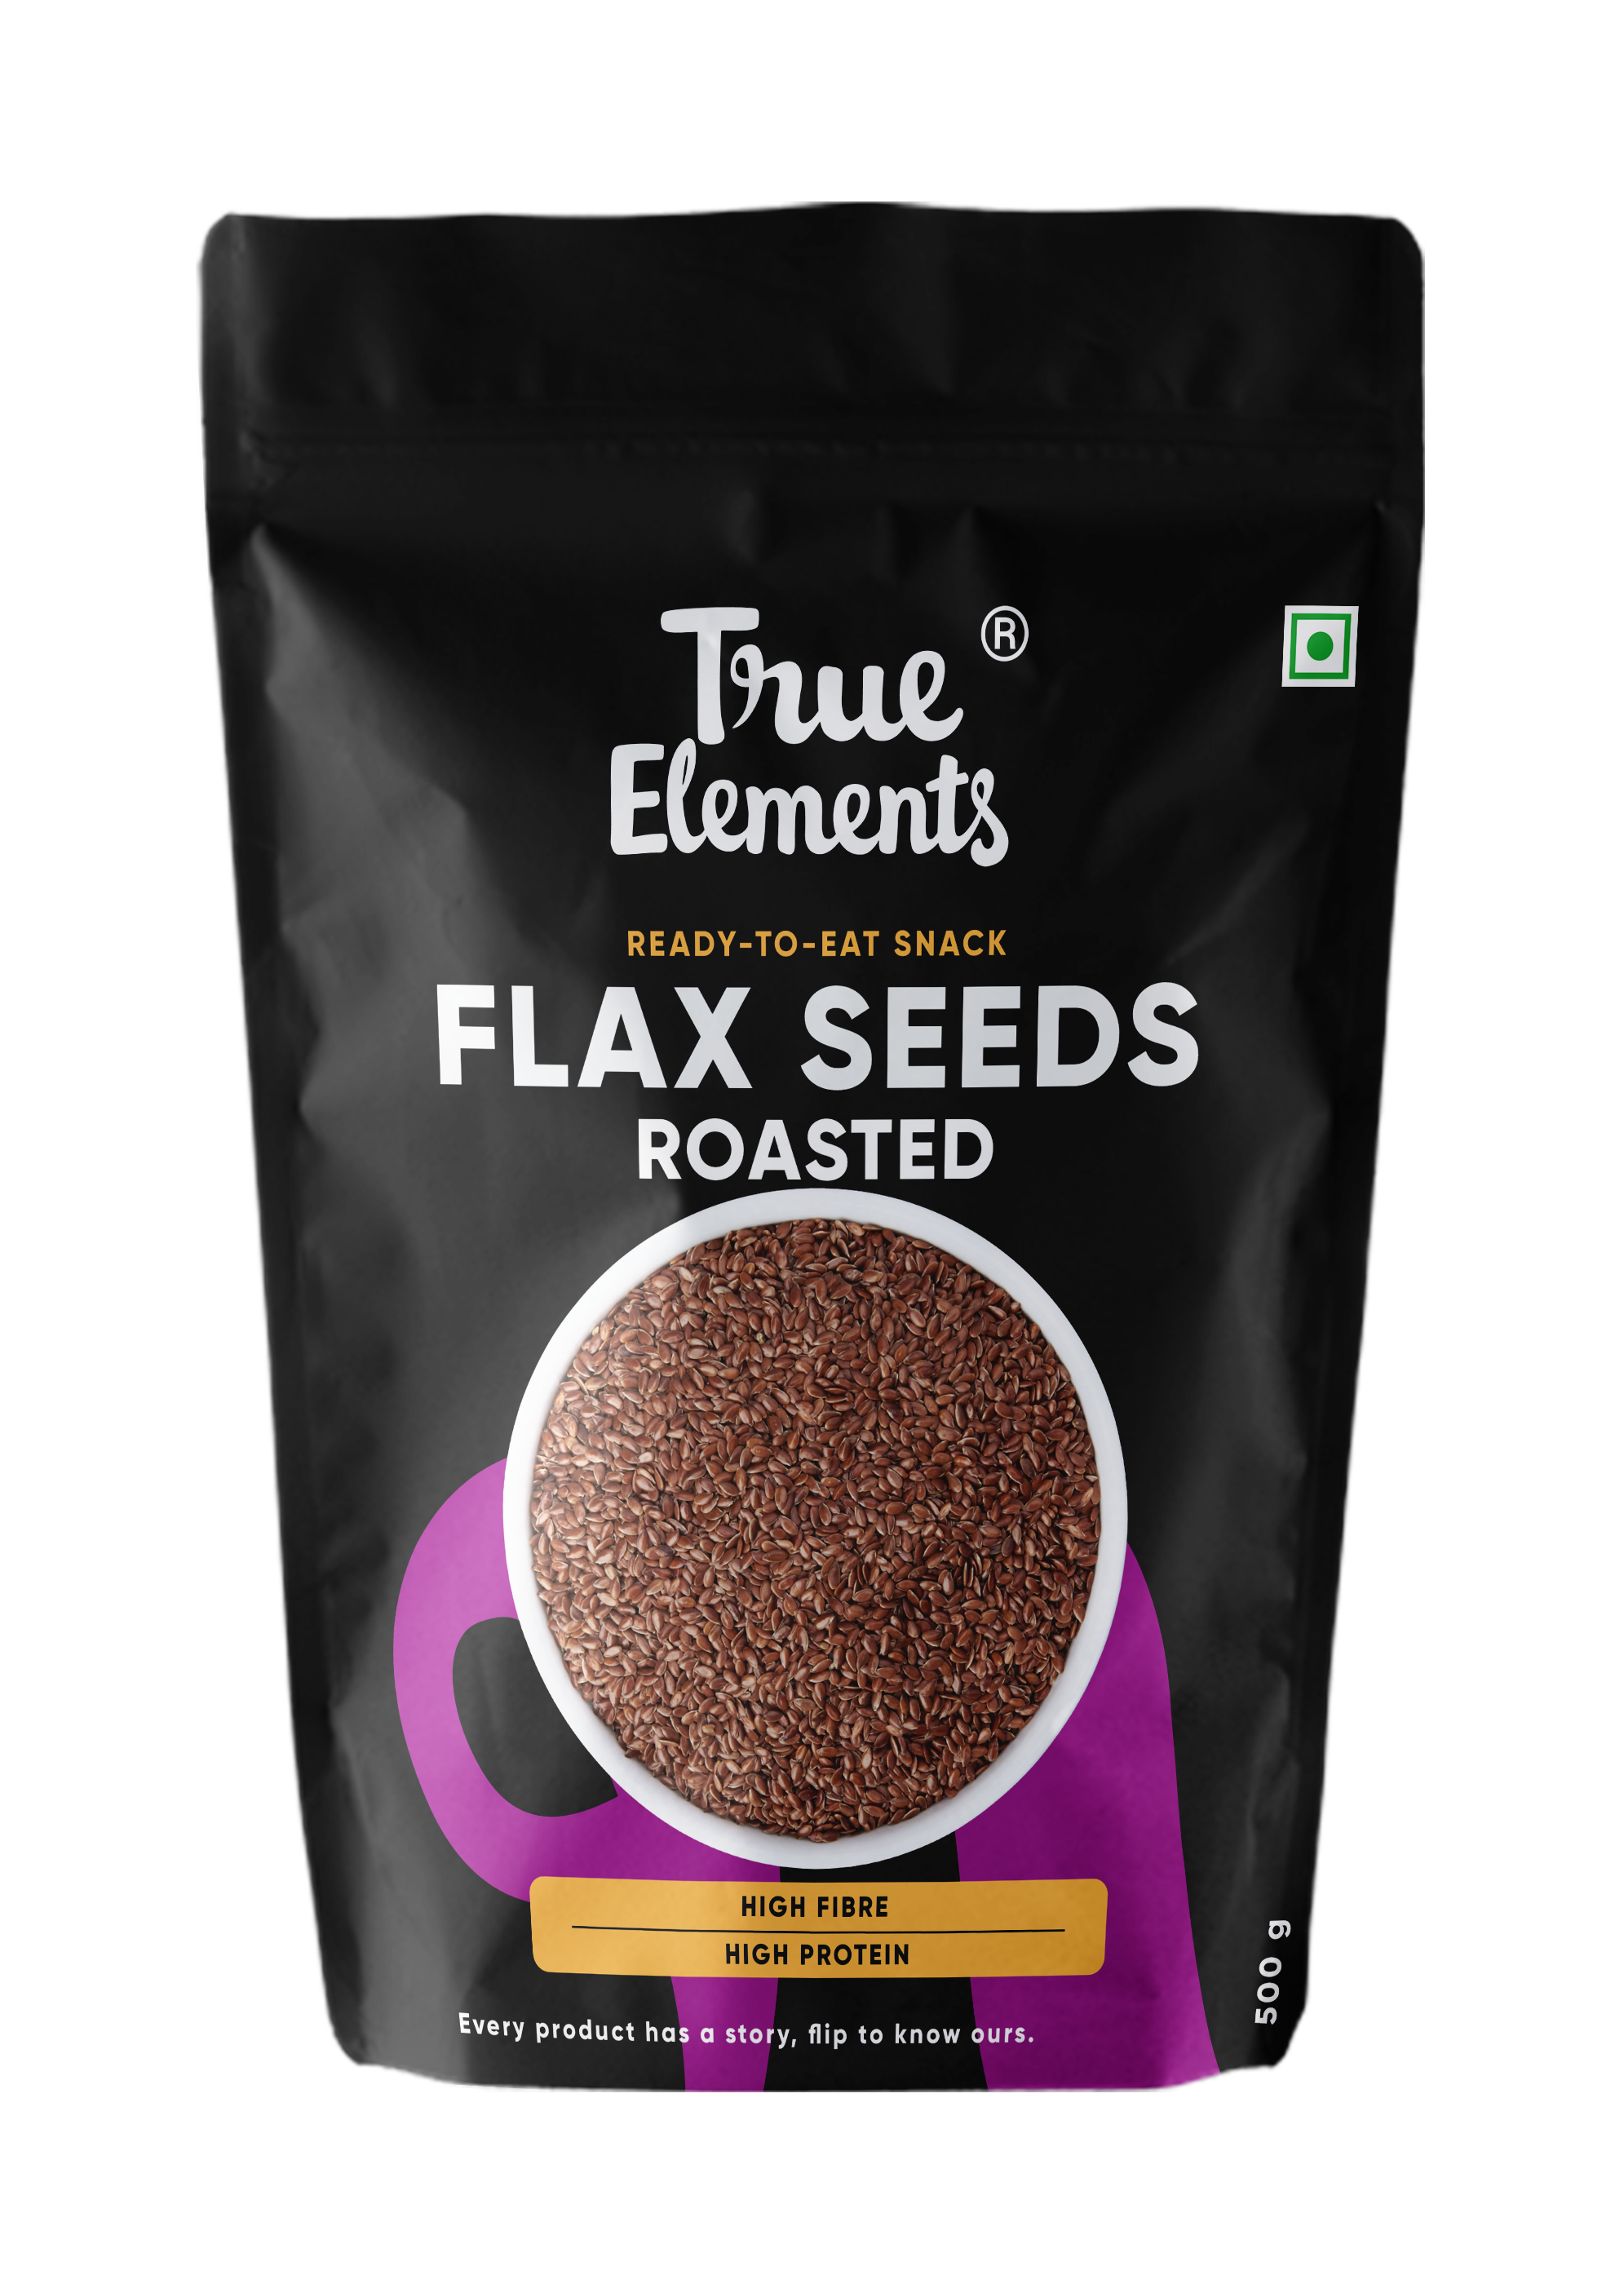 True Elements Roasted Flax Seeds